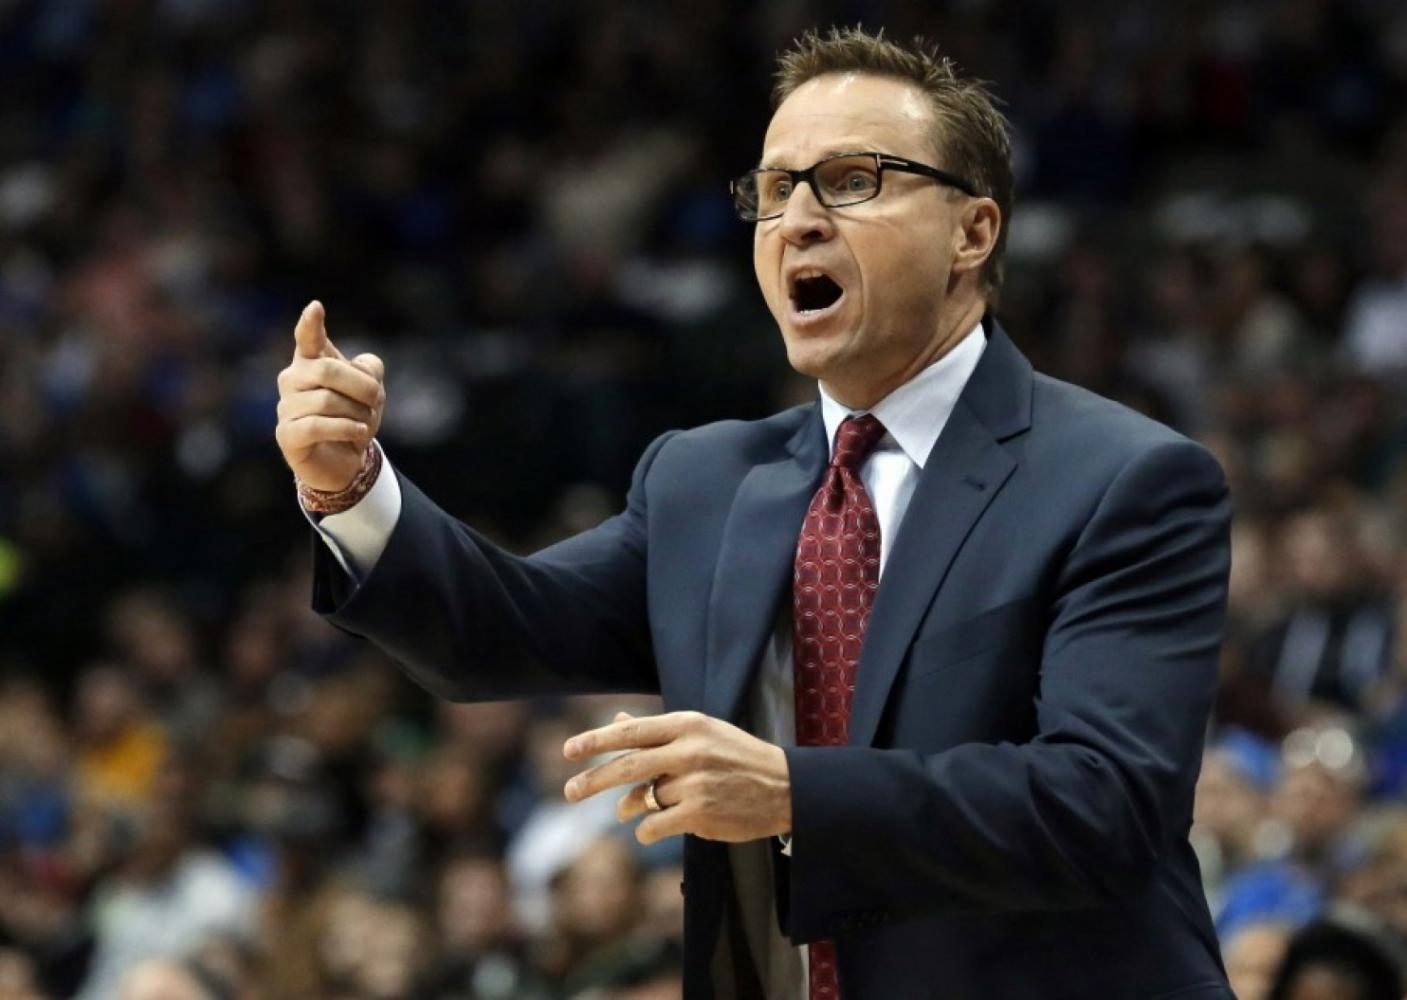 Wizards Head Coach Brooks recently joined the Wizards but his playoff experience didn’t help the Wiz against the Celtics.